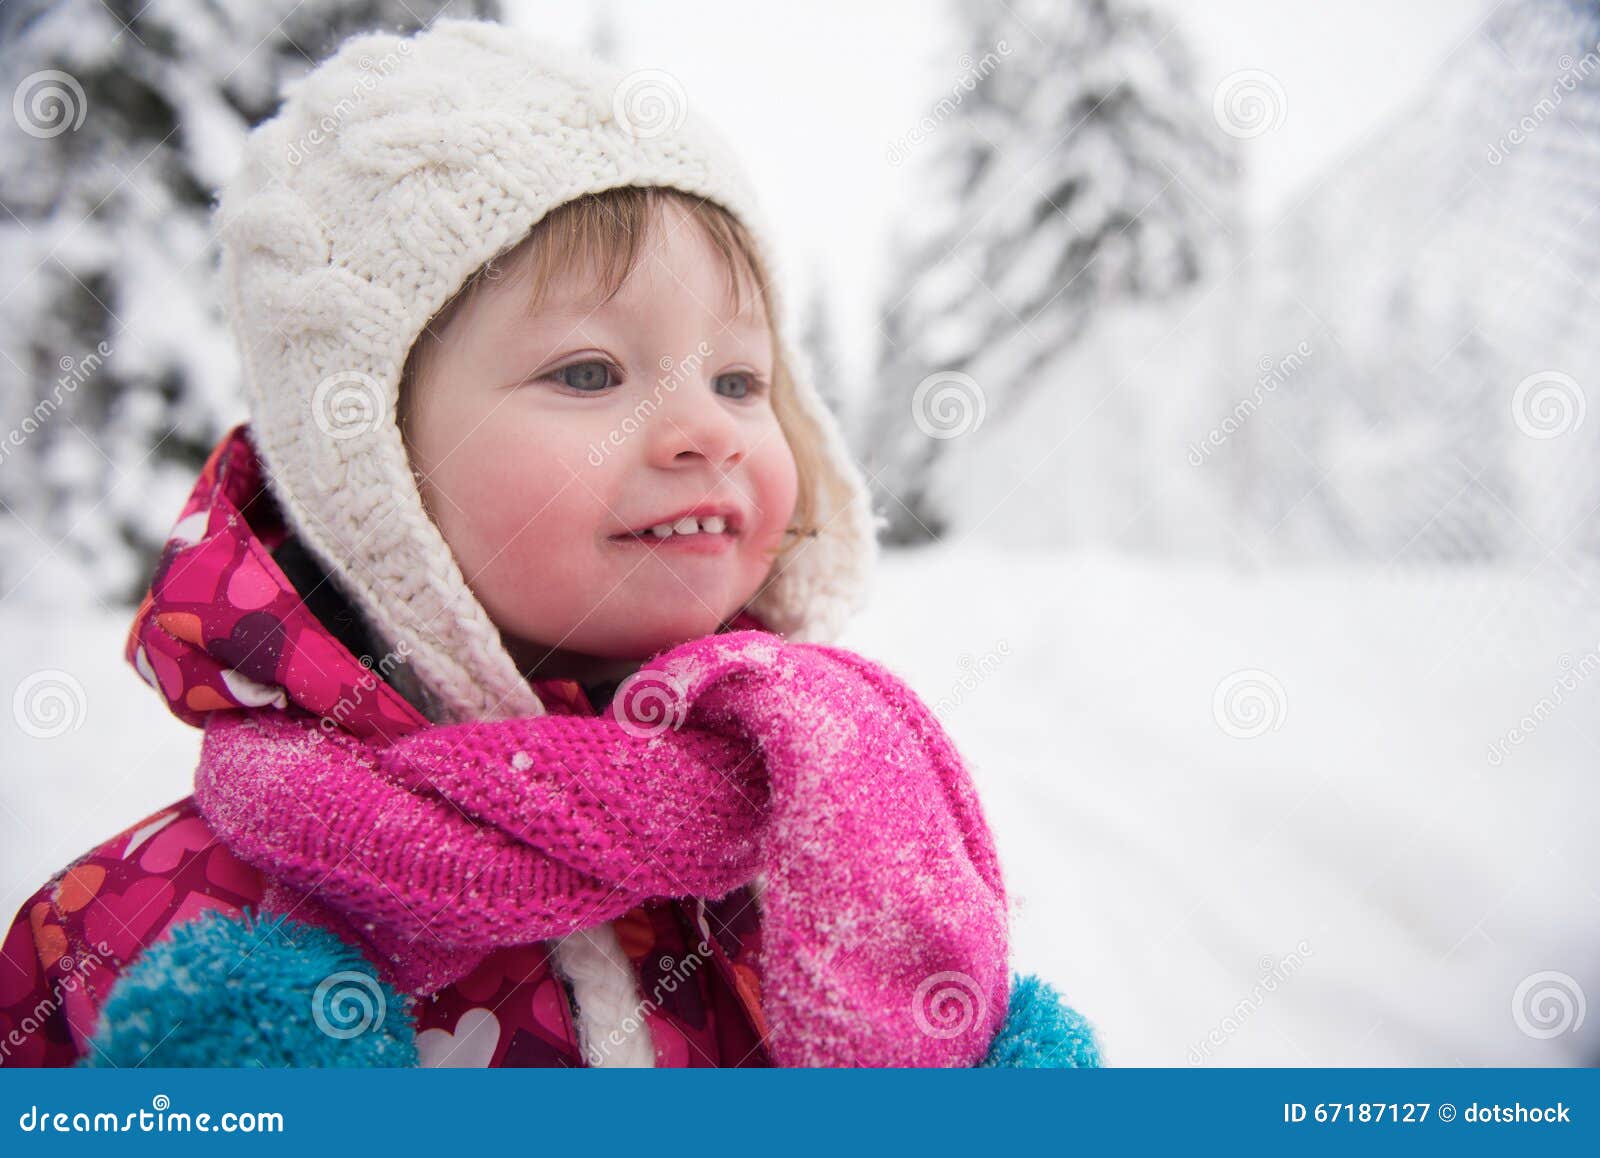 Little Girl Have Fun At Snowy Winter Day Stock Image Image Of Fashion